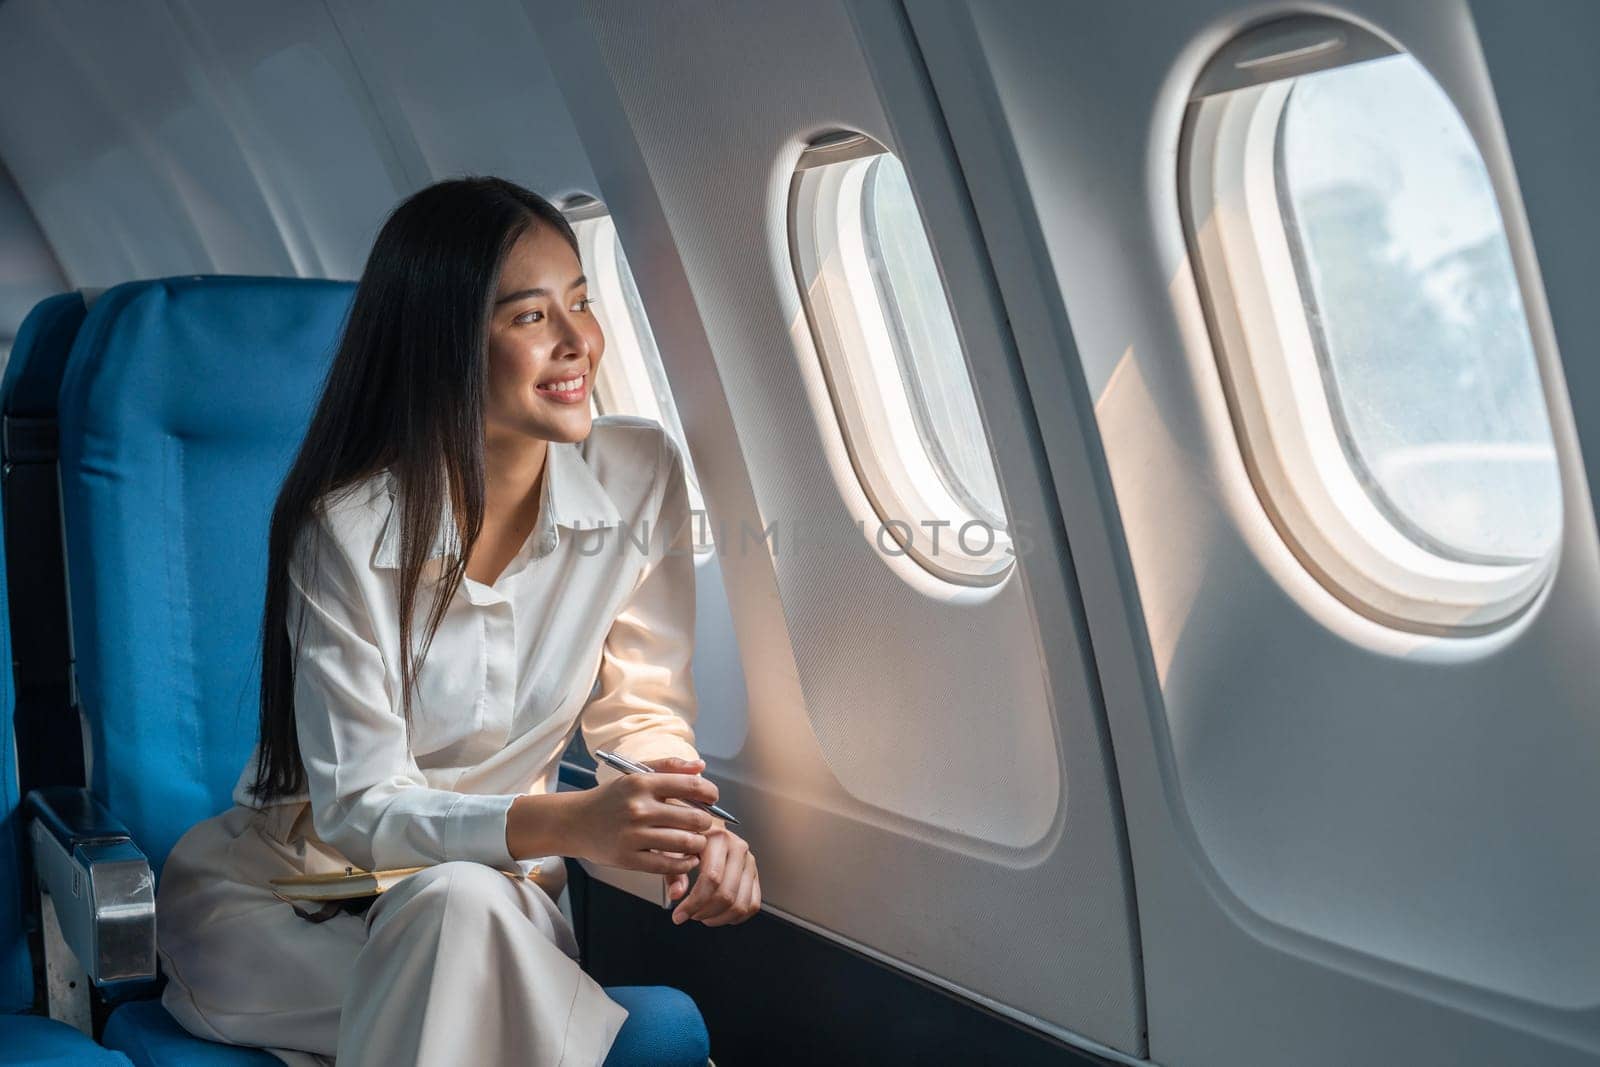 Asian woman sitting in a seat in airplane and looking out the window going on a trip vacation travel concept.